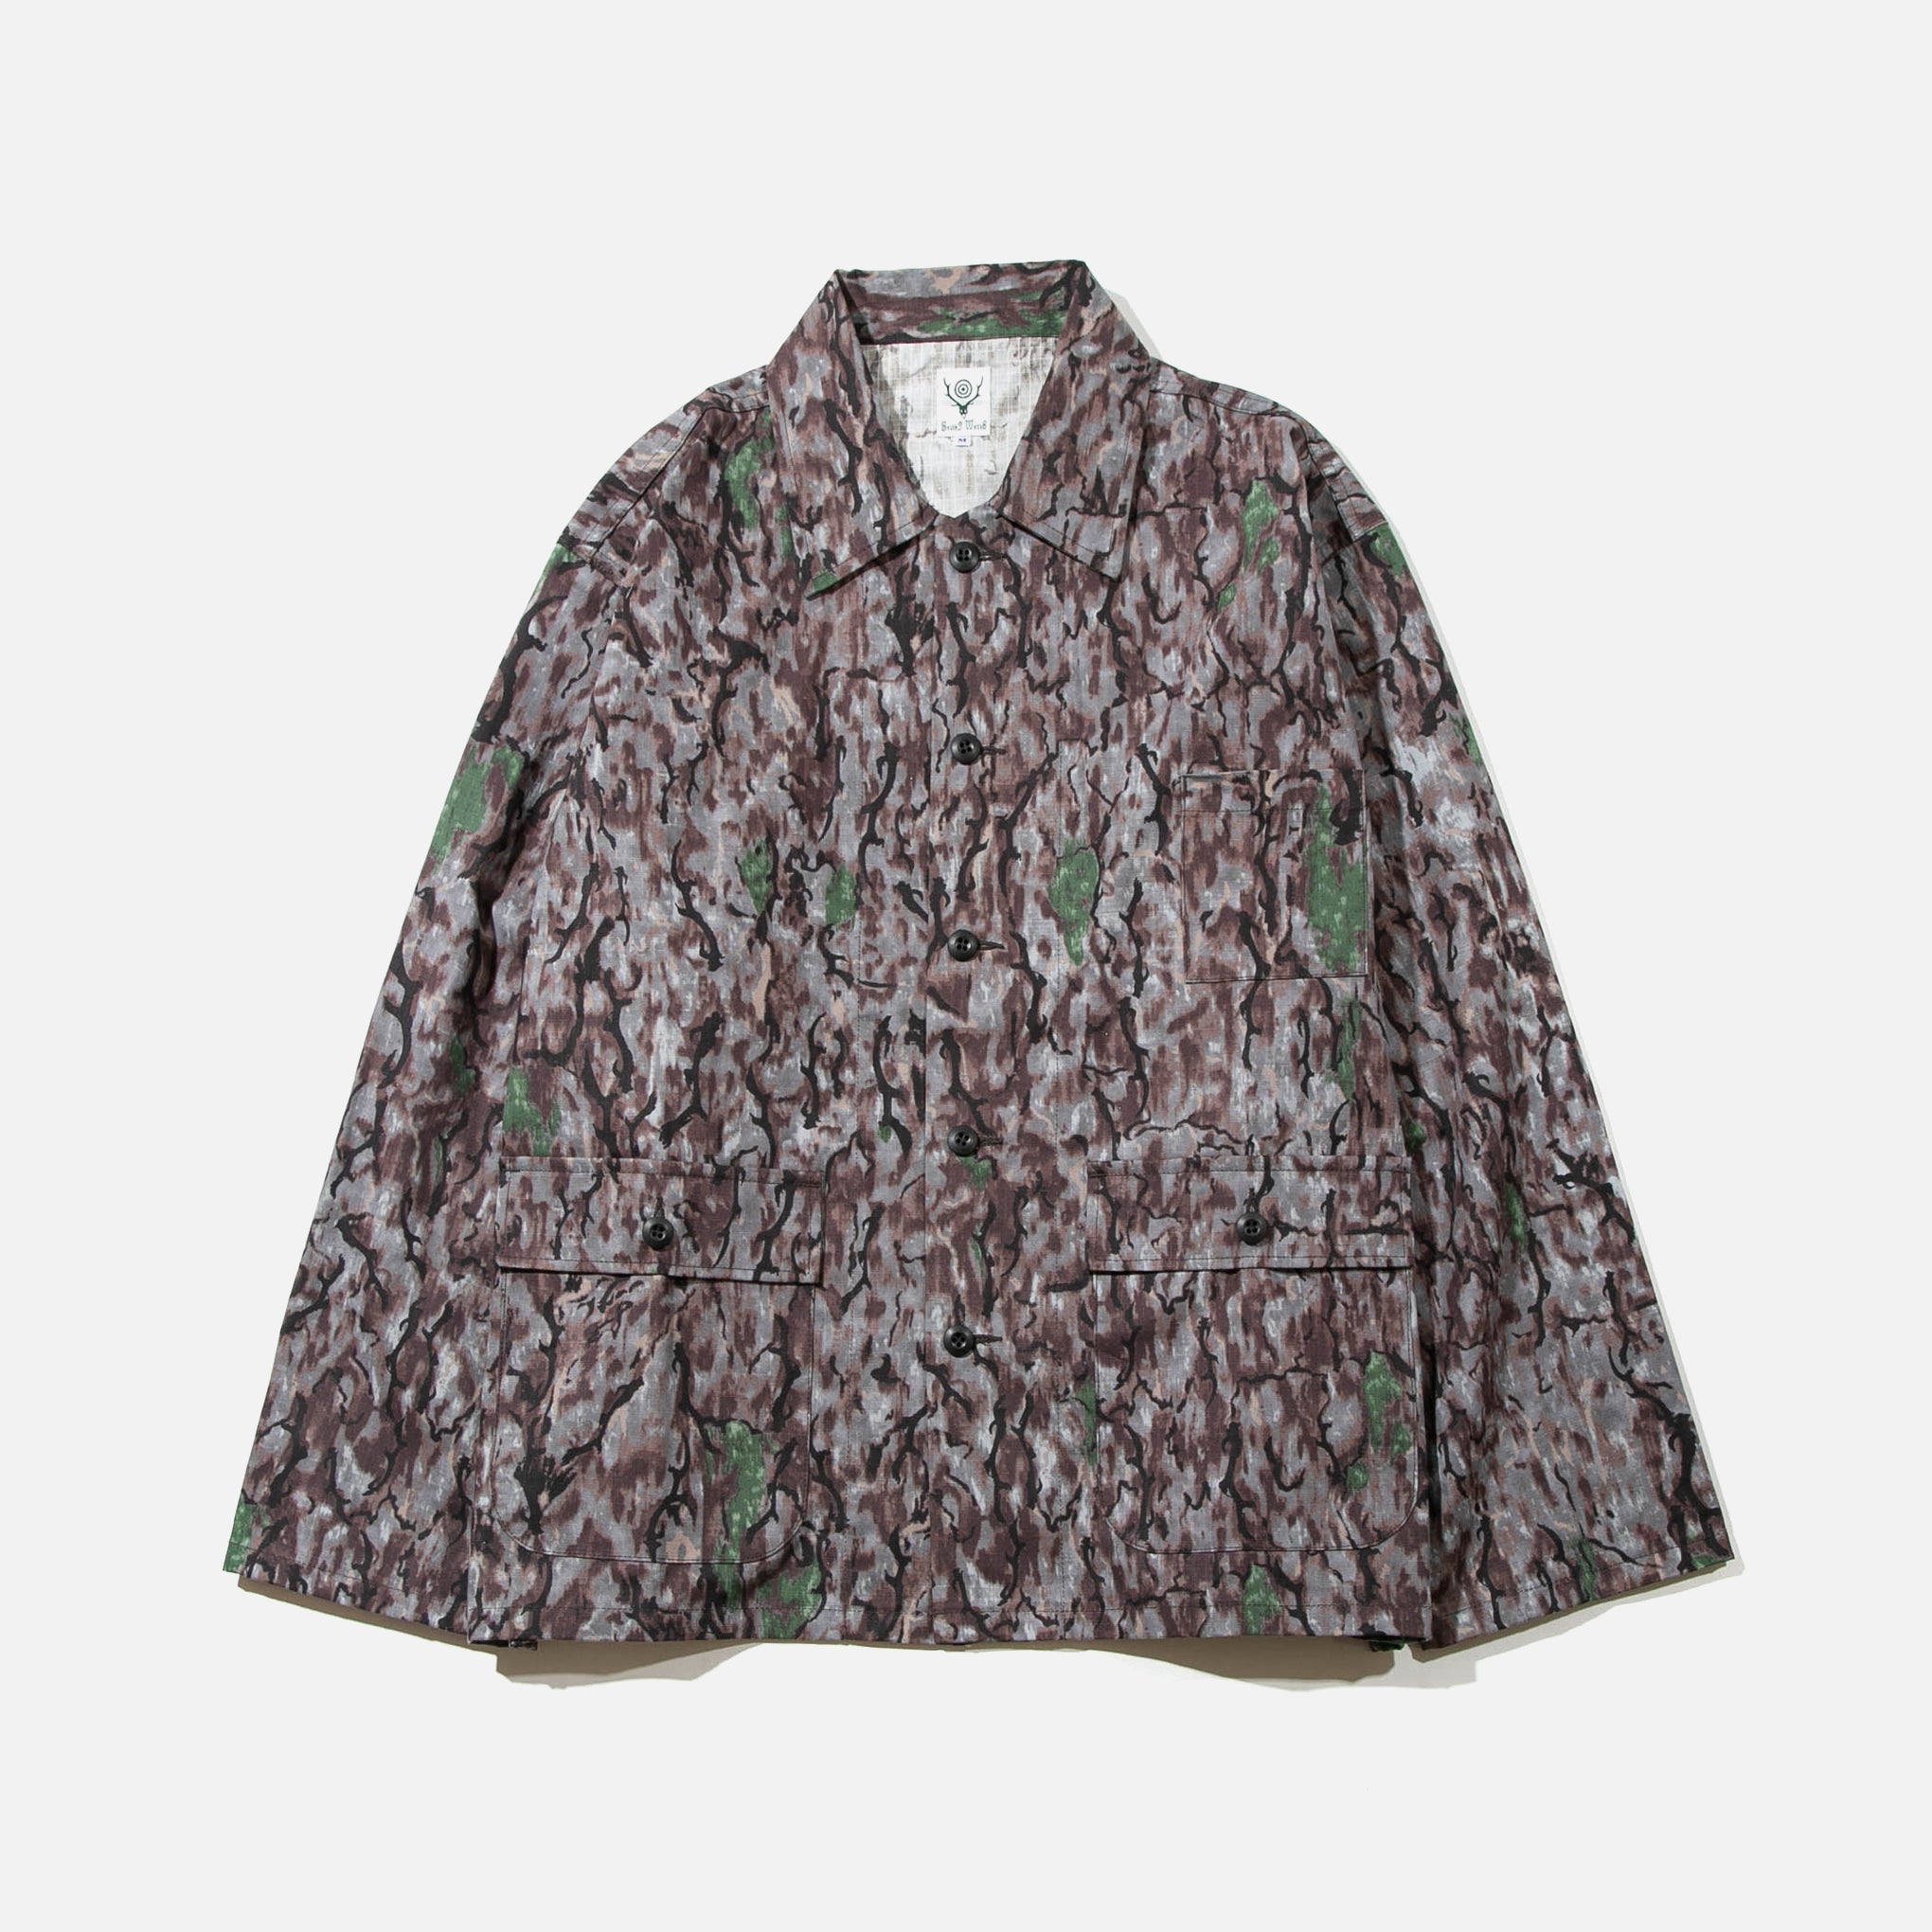 South2 West8 Hunting Shirt - Horn Camo Cotton Ripstop